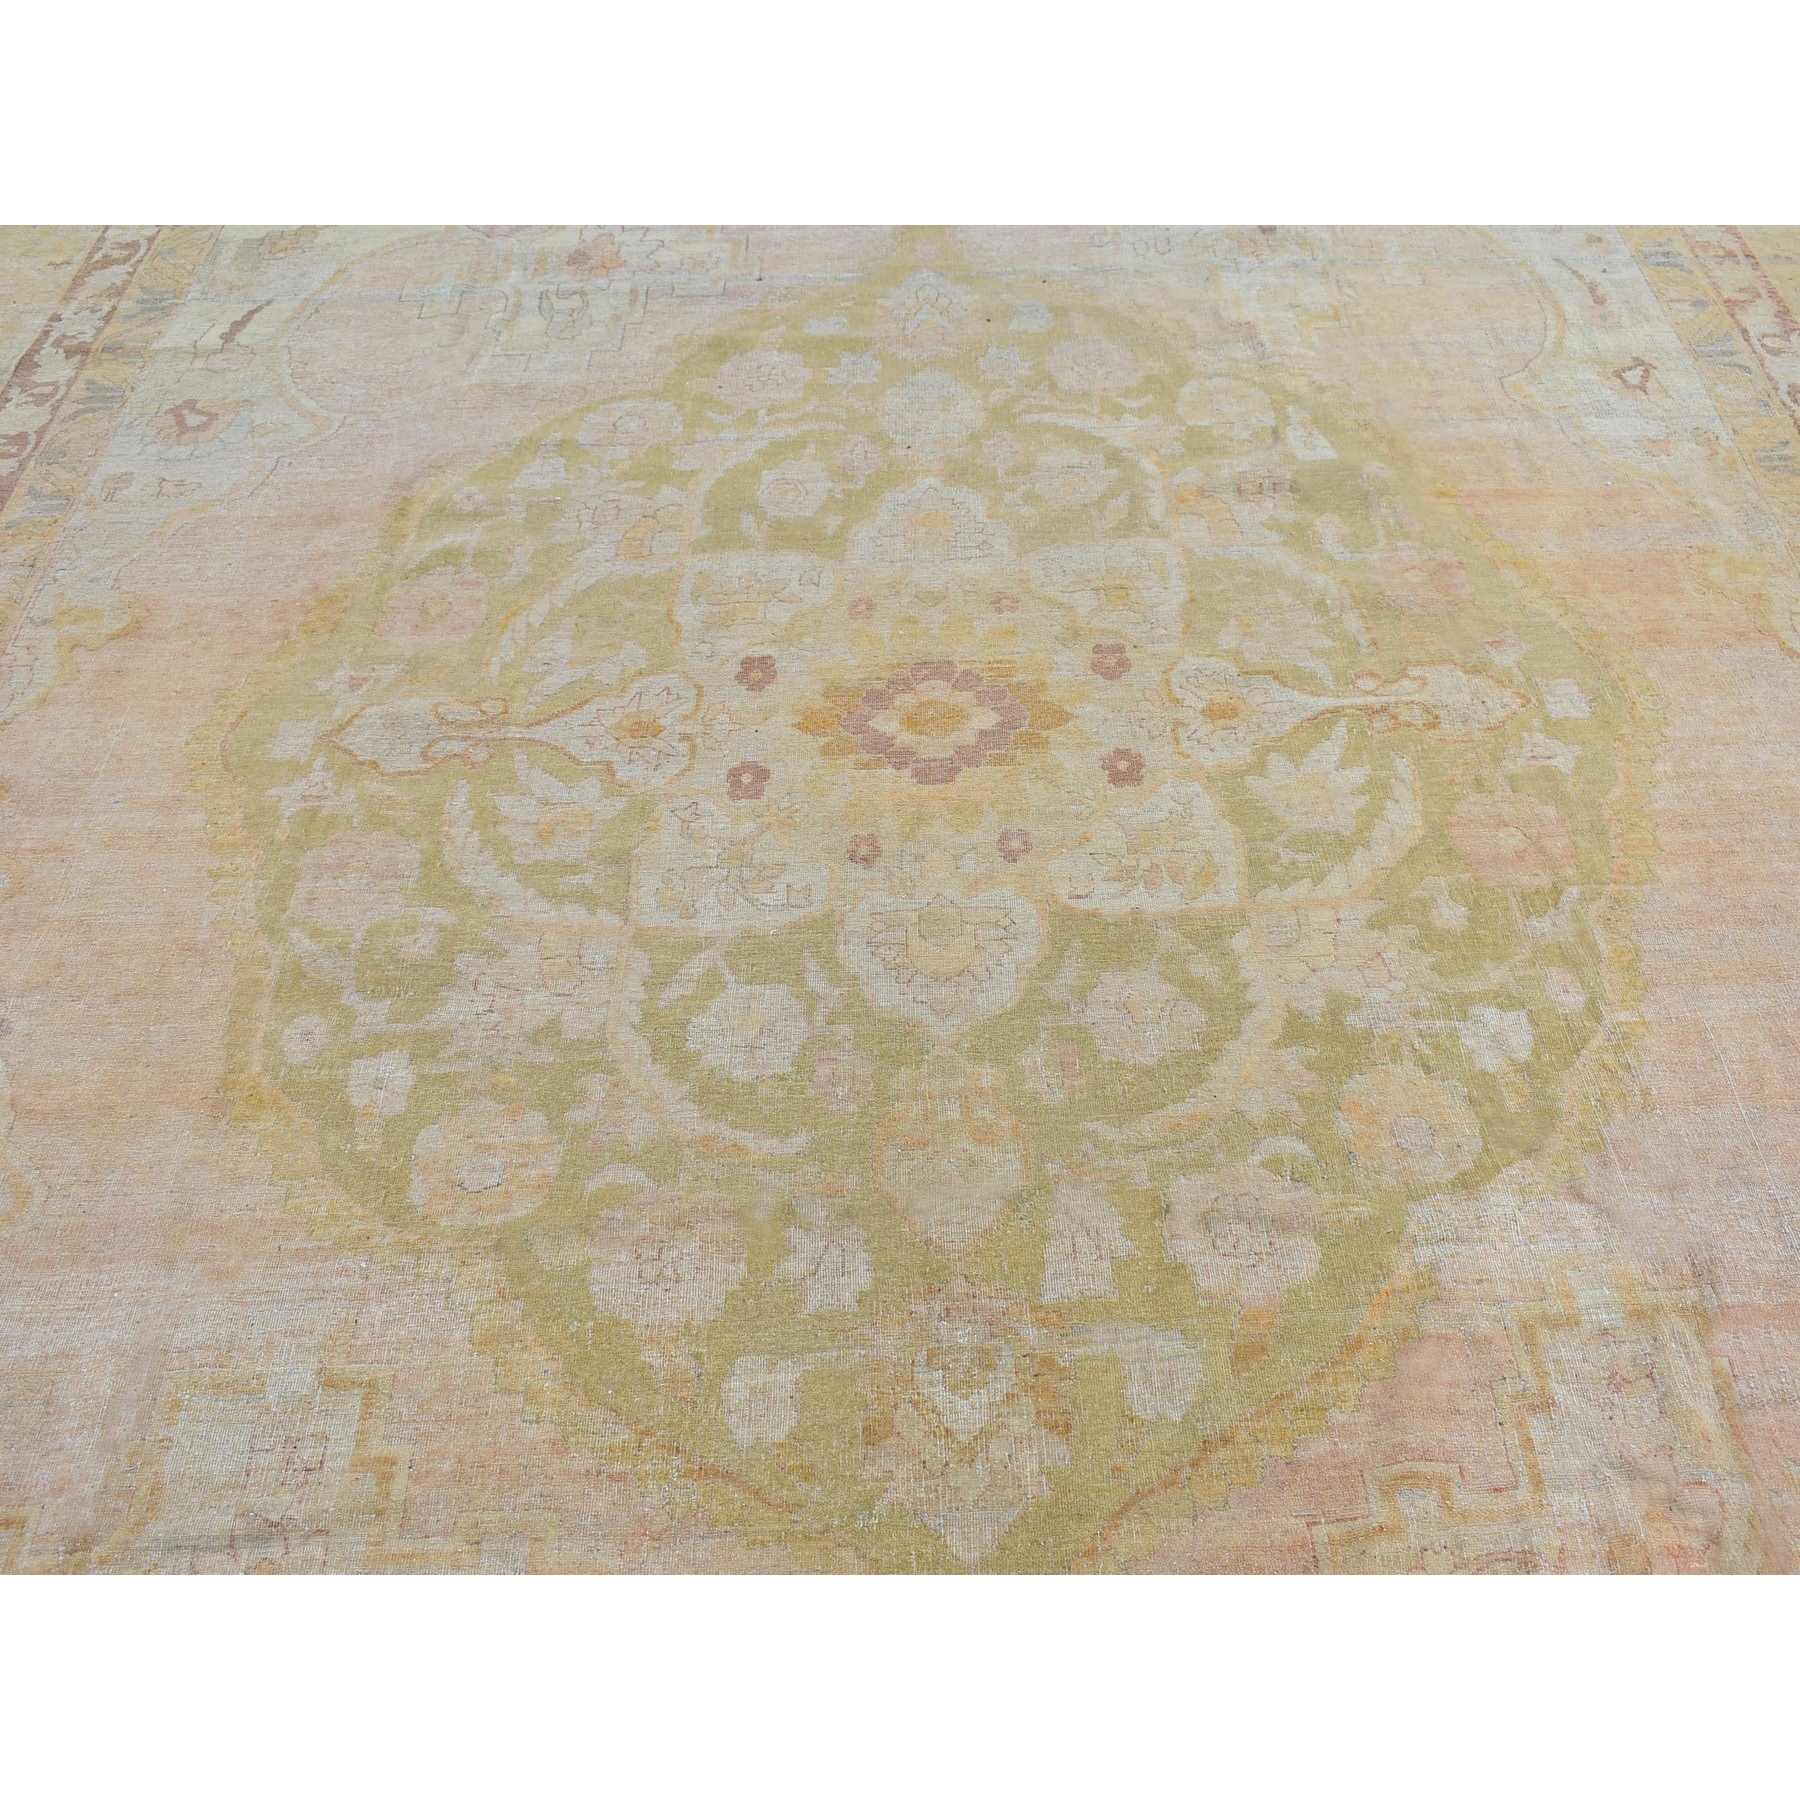 Antique-Hand-Knotted-Rug-332525